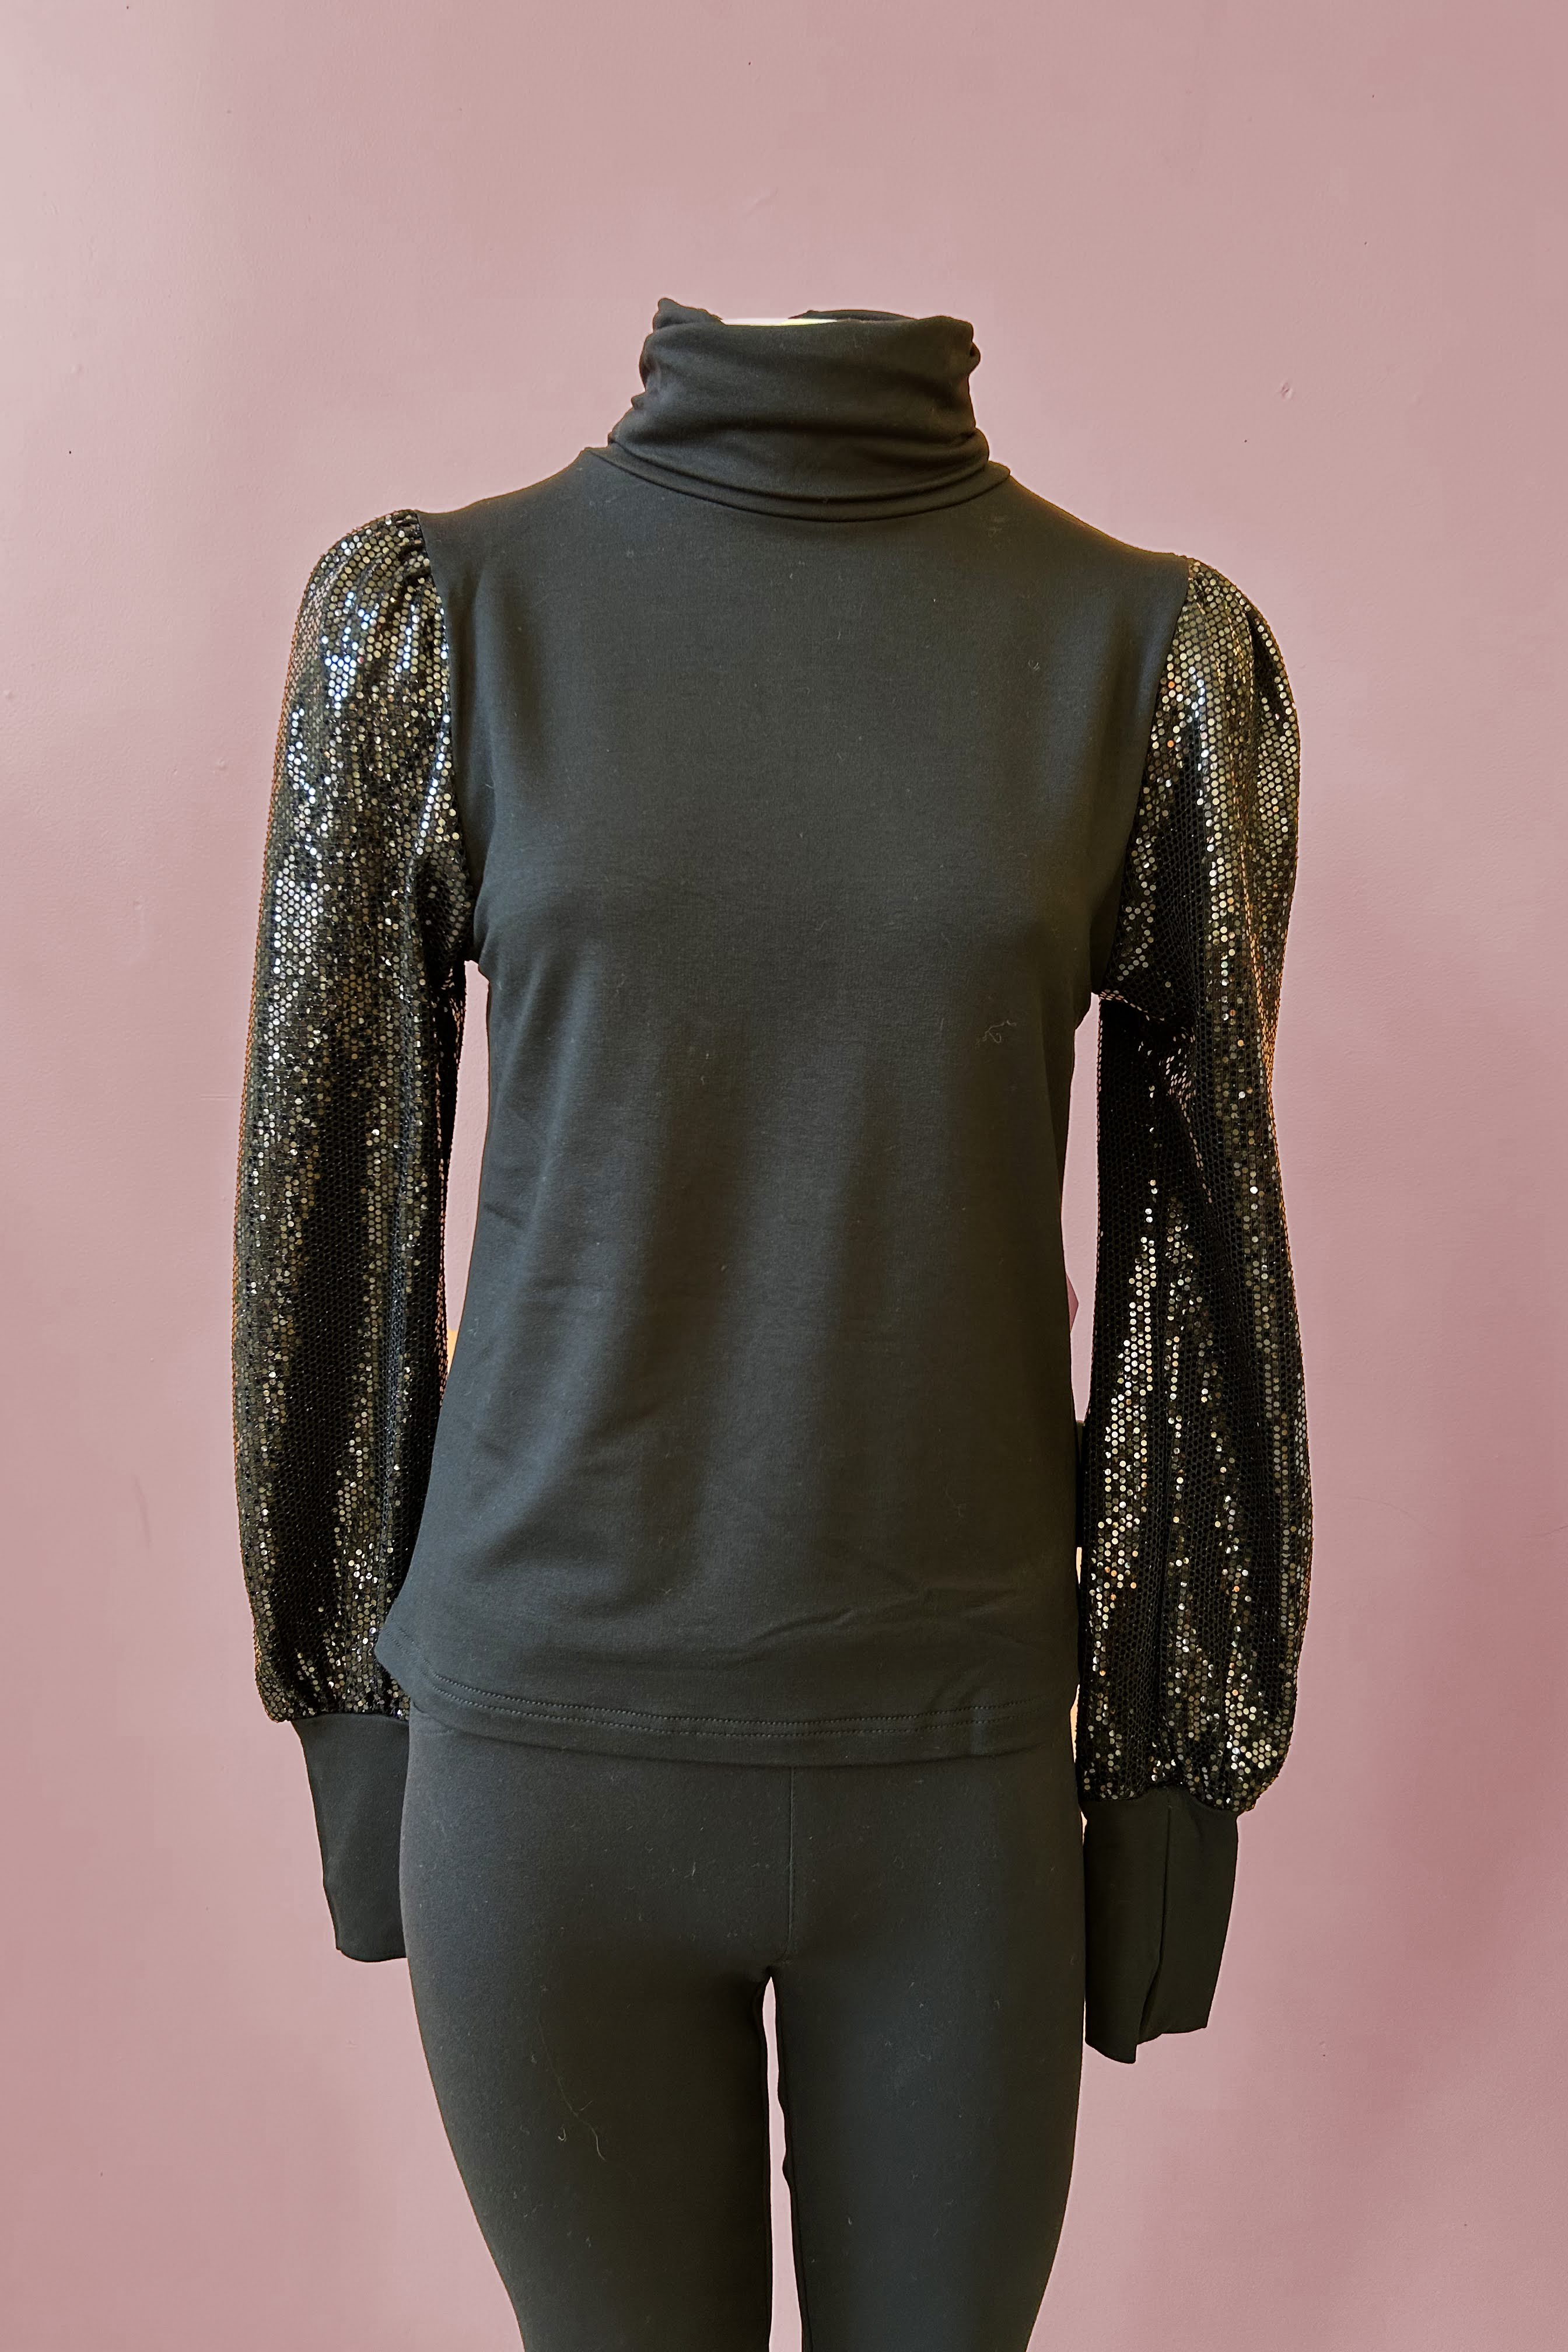 Turtleneck Top by Misstery, Black withBlack Sparkly Sleeves, high neck, puffed sleeves with gathered cuffs, sizes S to XL, made in Toronto 